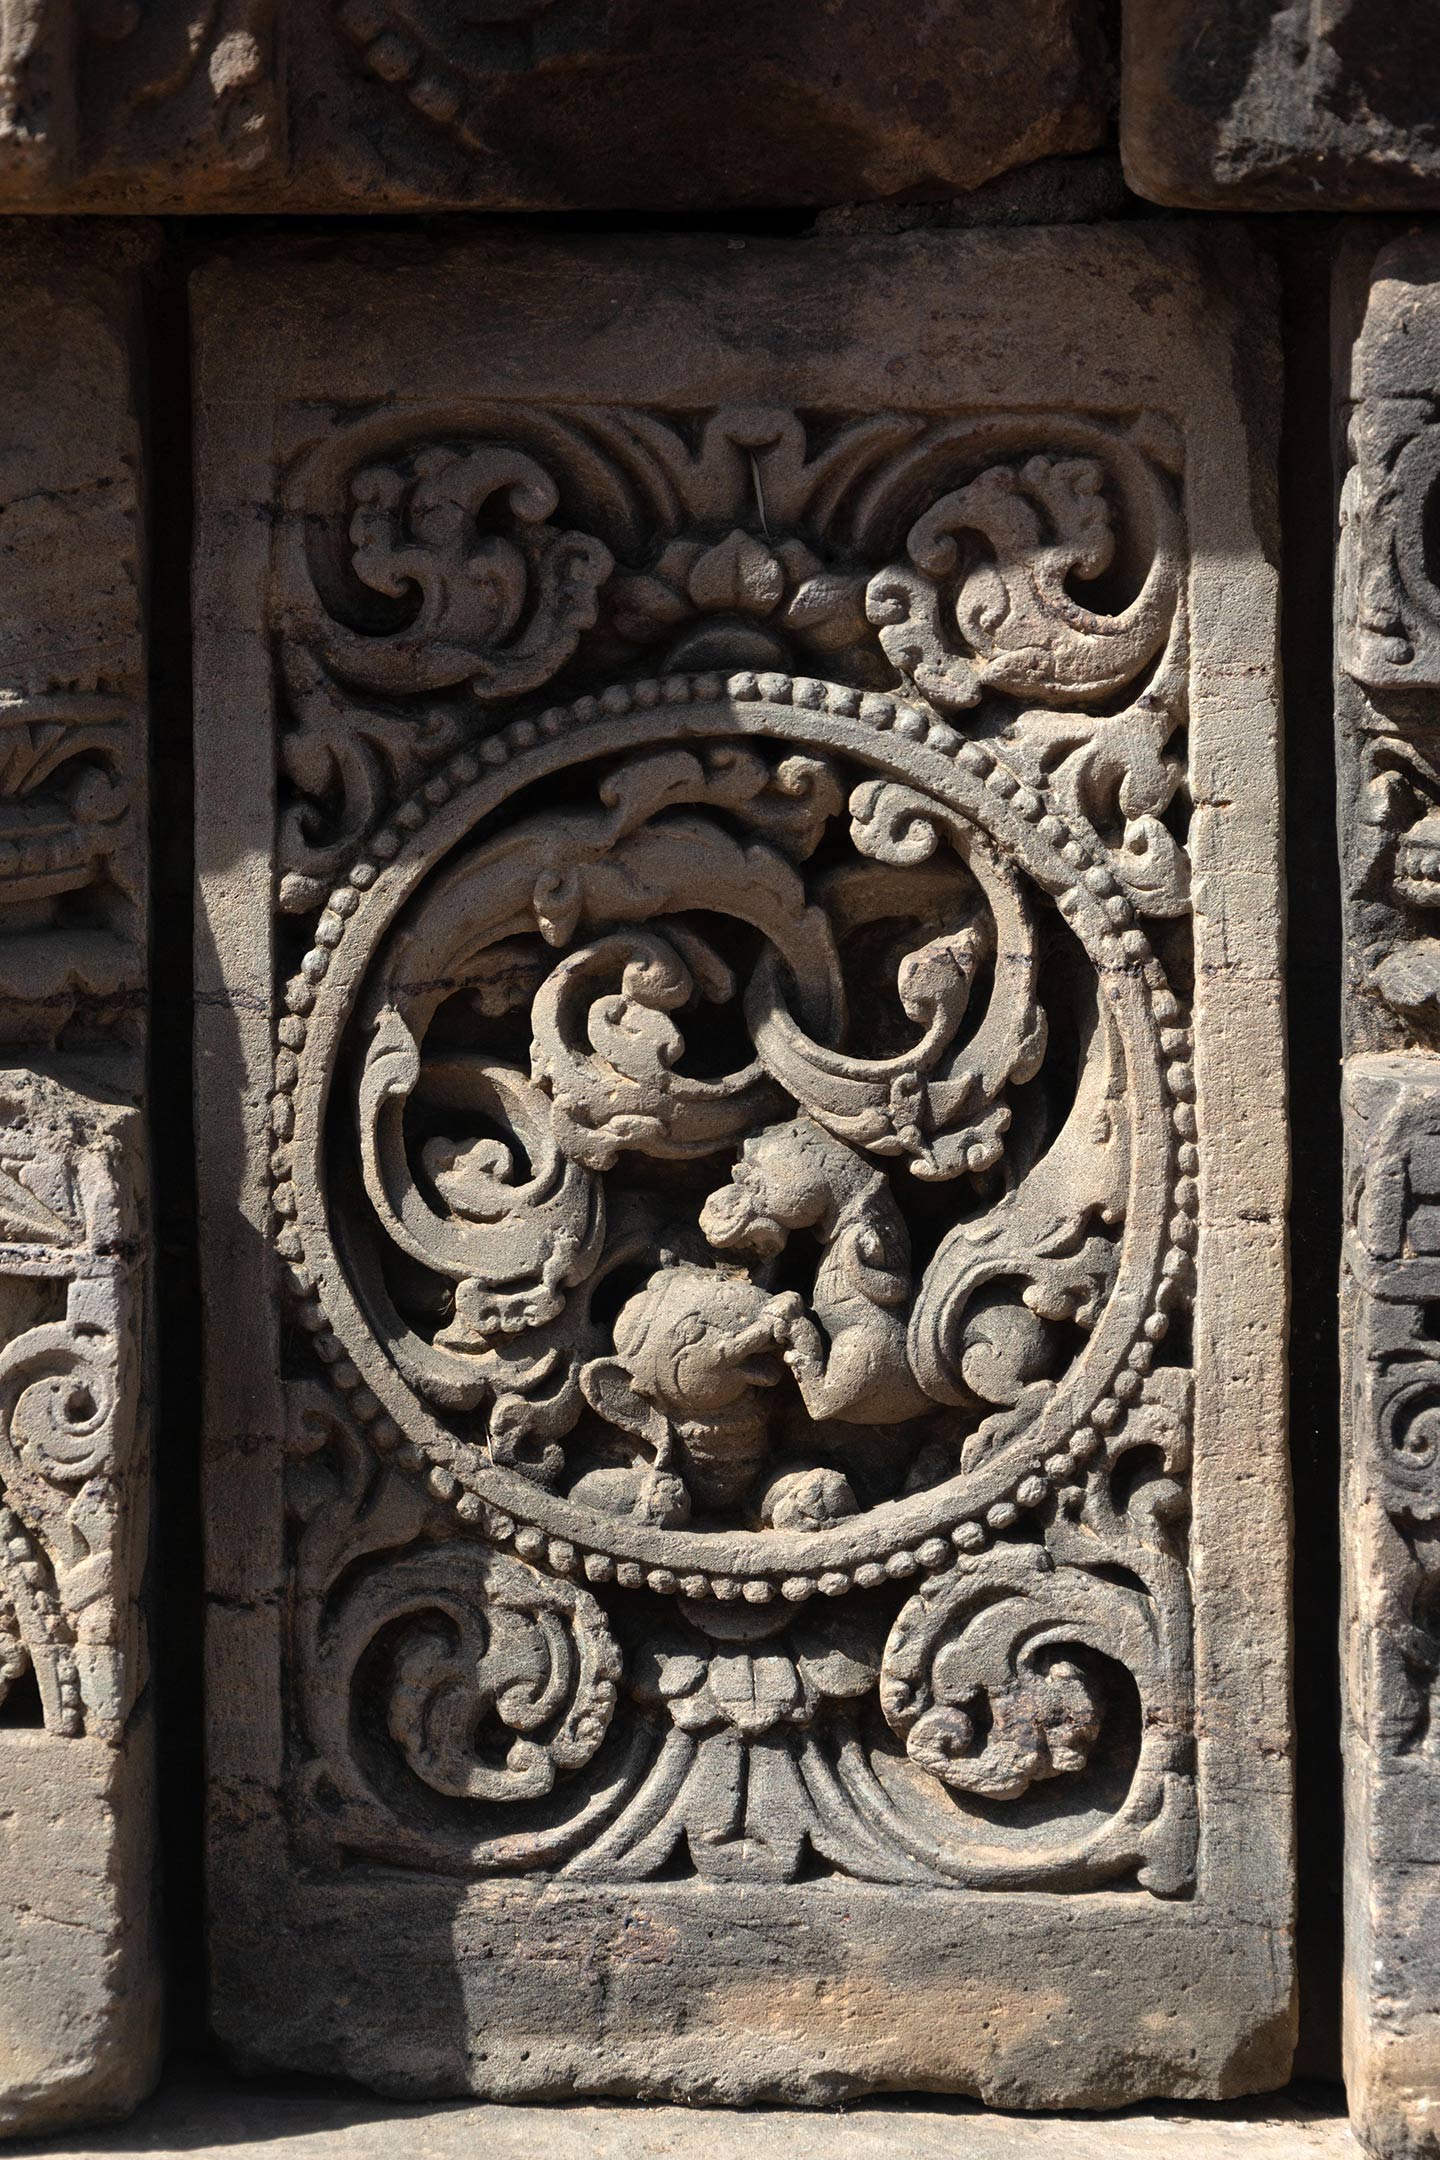 The central artwork of the plaque is in the form of a circular medallion surrounded by a foliage motif. Seen in this plaque, simha (lion) vyala and gaja (elephant) vyala engaged in a fight. The rest of the plaque is decorated with ardha padma (half lotus) and kalpa lata (creeper) motifs.